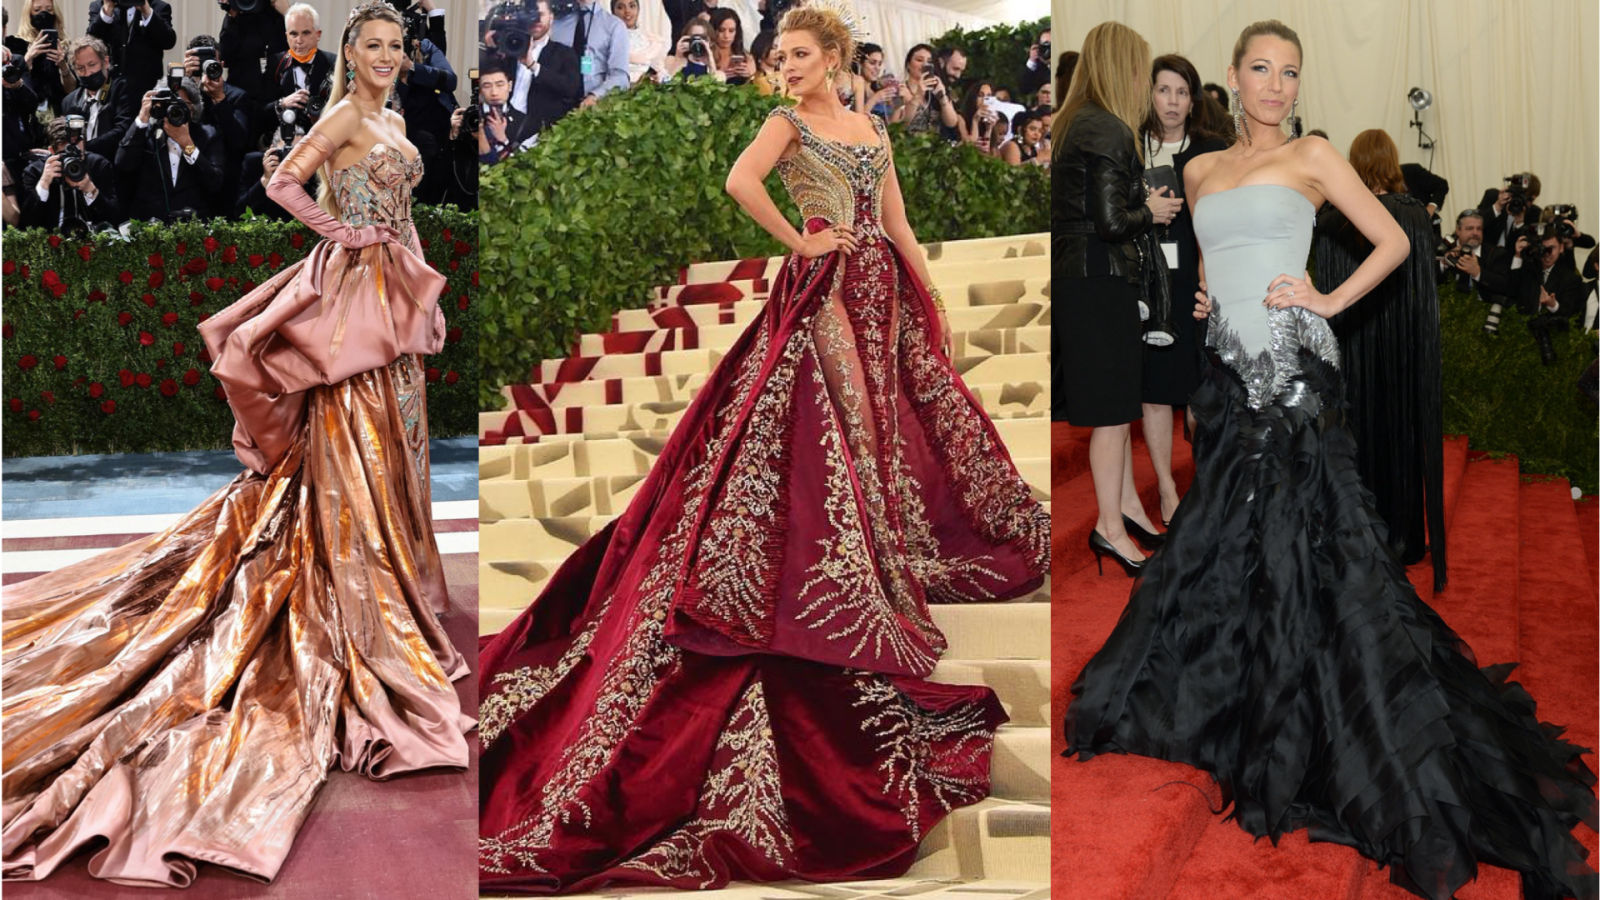 Blake Lively's Best Met Gala Looks Over The Years—She Understands